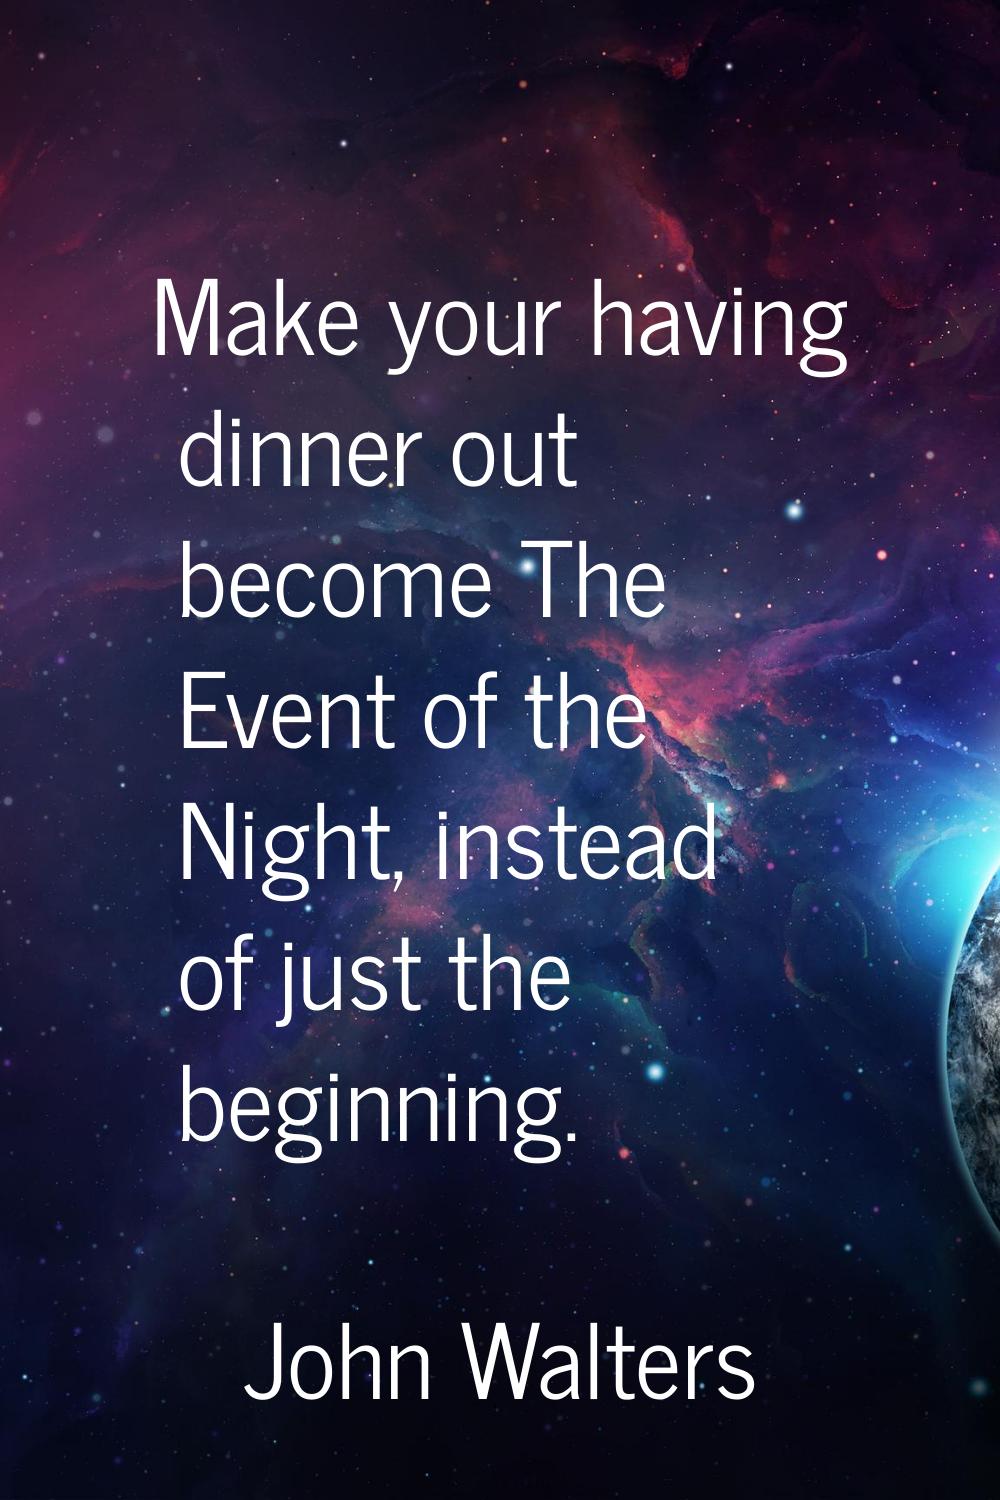 Make your having dinner out become The Event of the Night, instead of just the beginning.